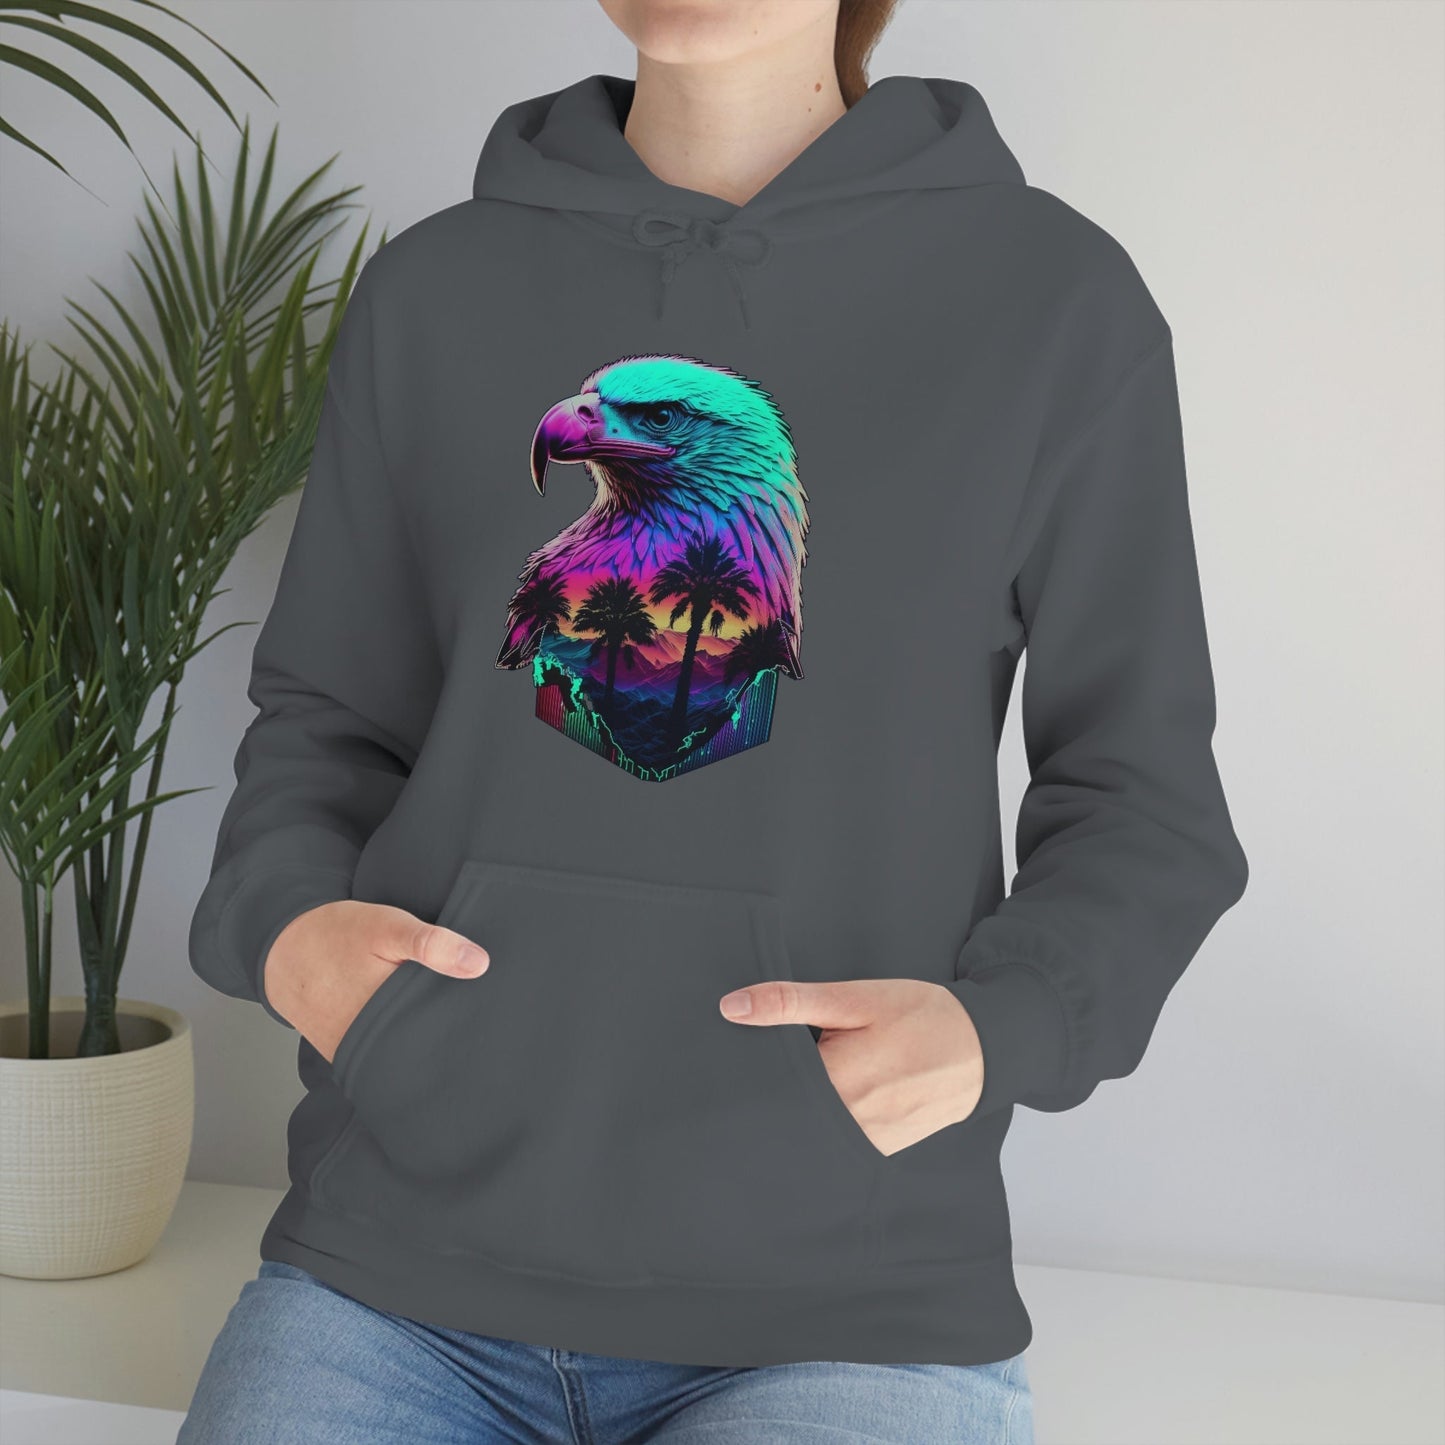 Womens and Mens Patriotic Hoodies - Land of the Vapor, Home of the Wave - Bind on Equip - 19440781292044521688